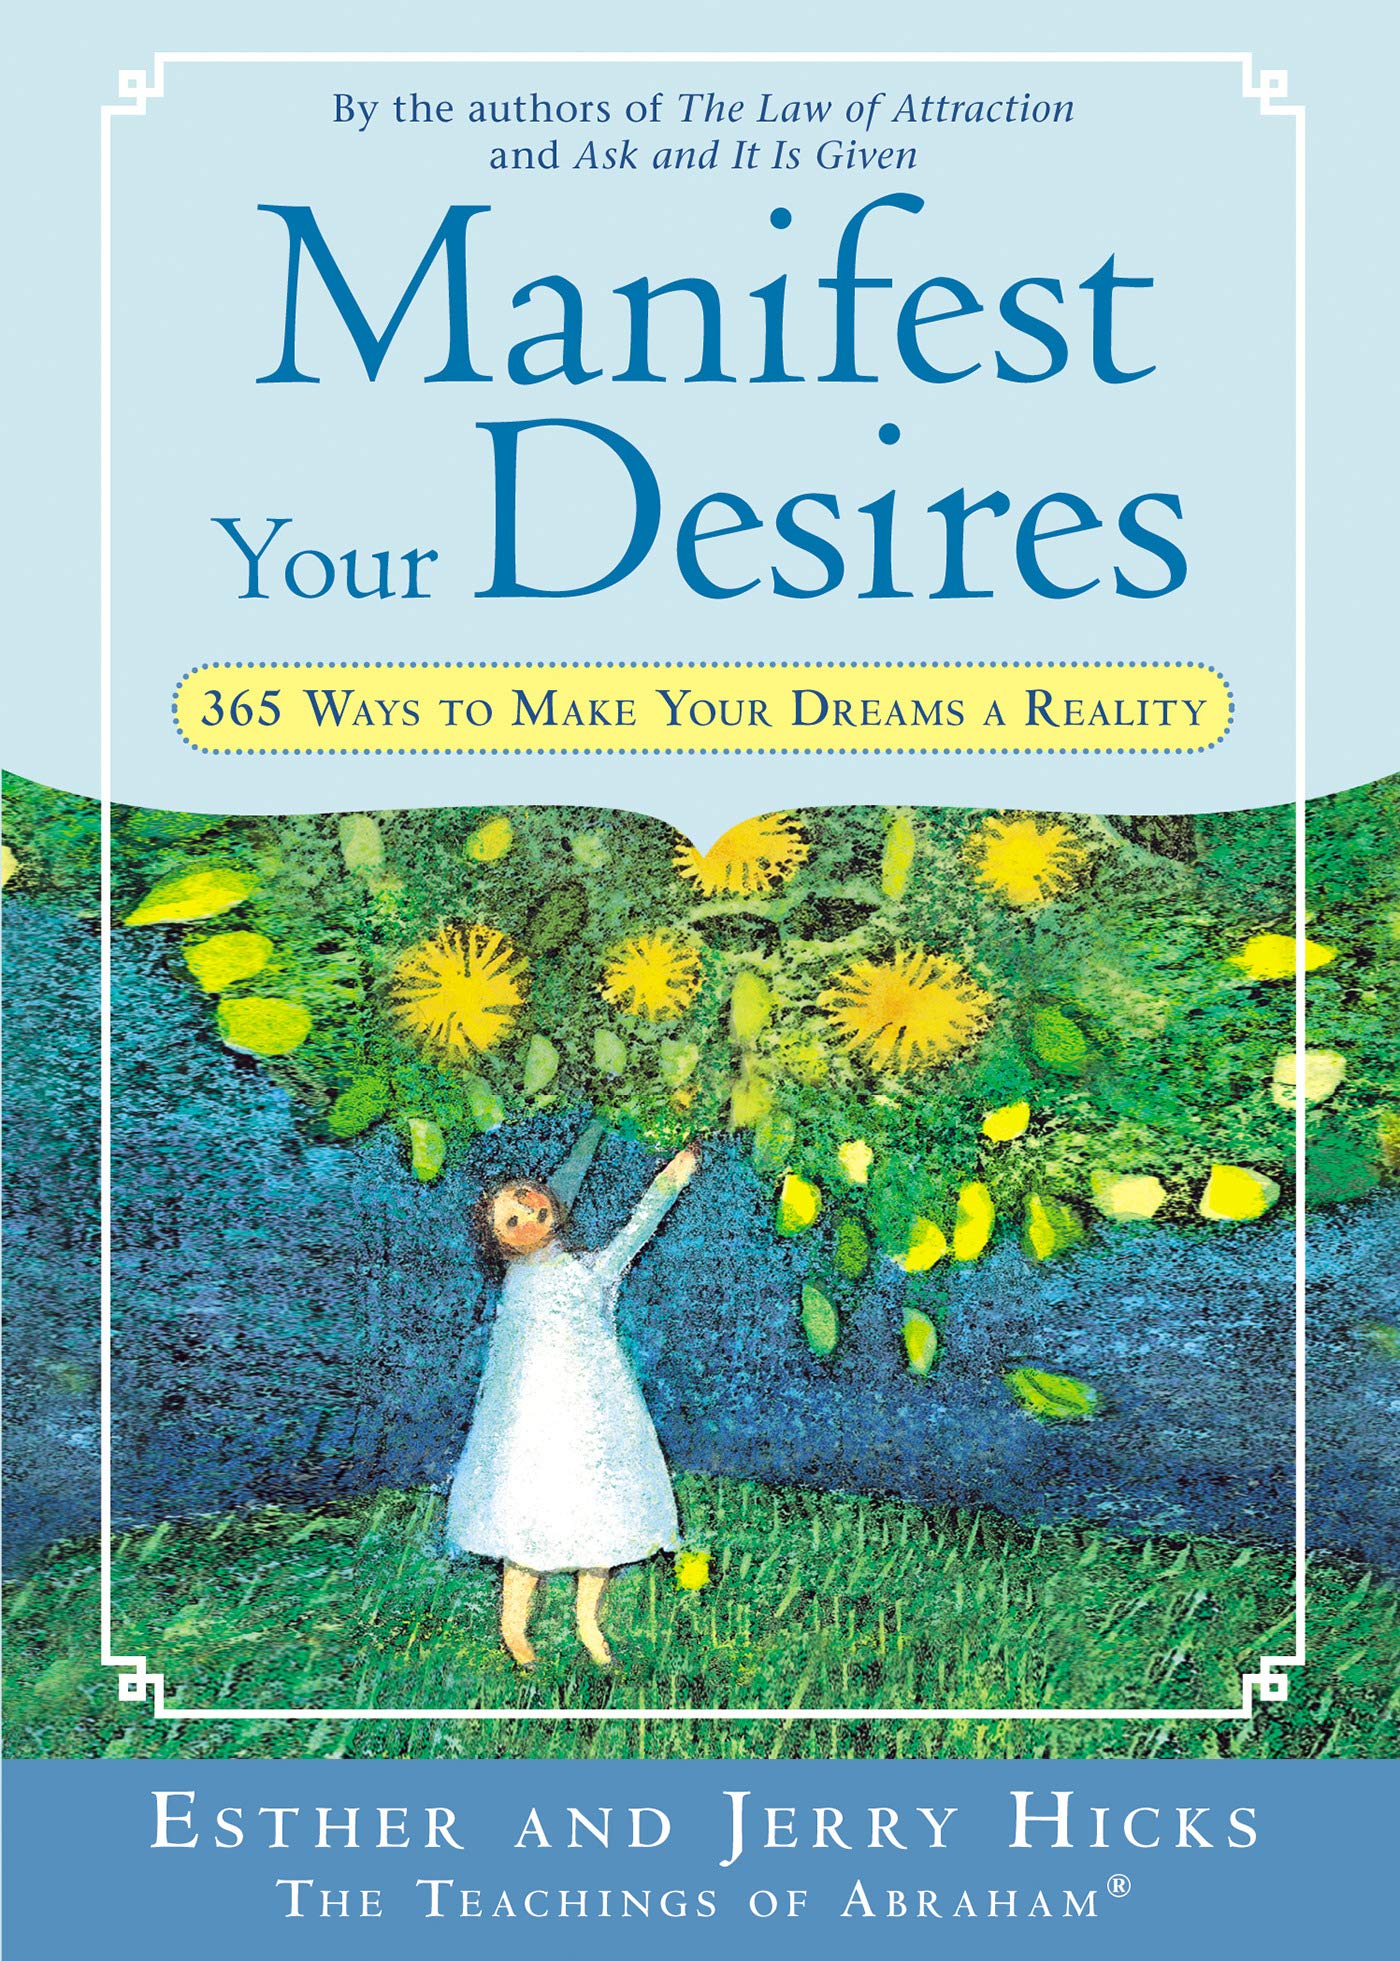 Manifest Your Desires: 365 Ways to Make Your Dream a Reality (Law of Attraction Book 3)